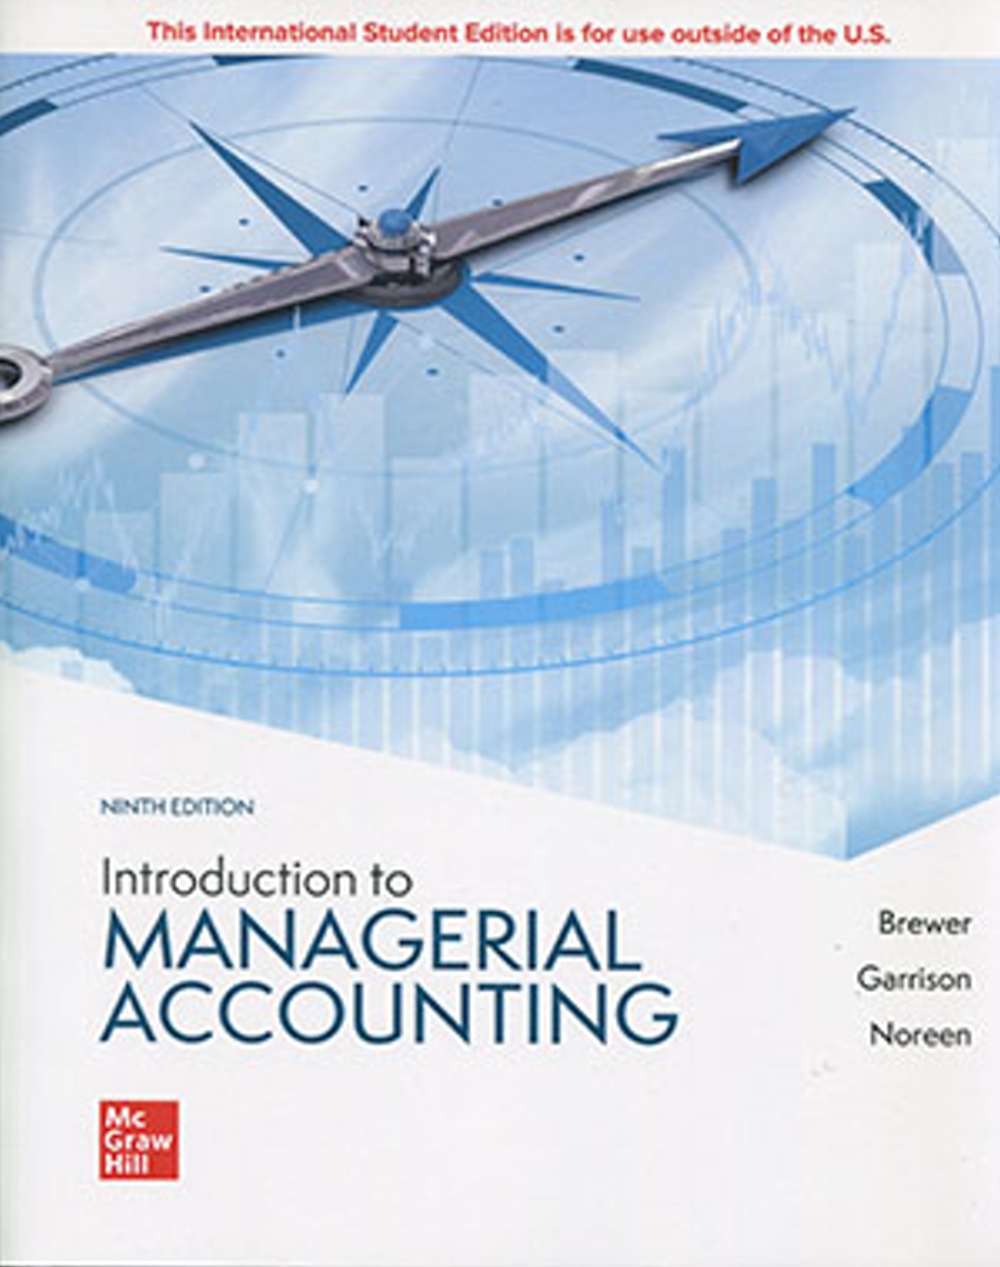 Introduction to Managerial Accounting(9版)